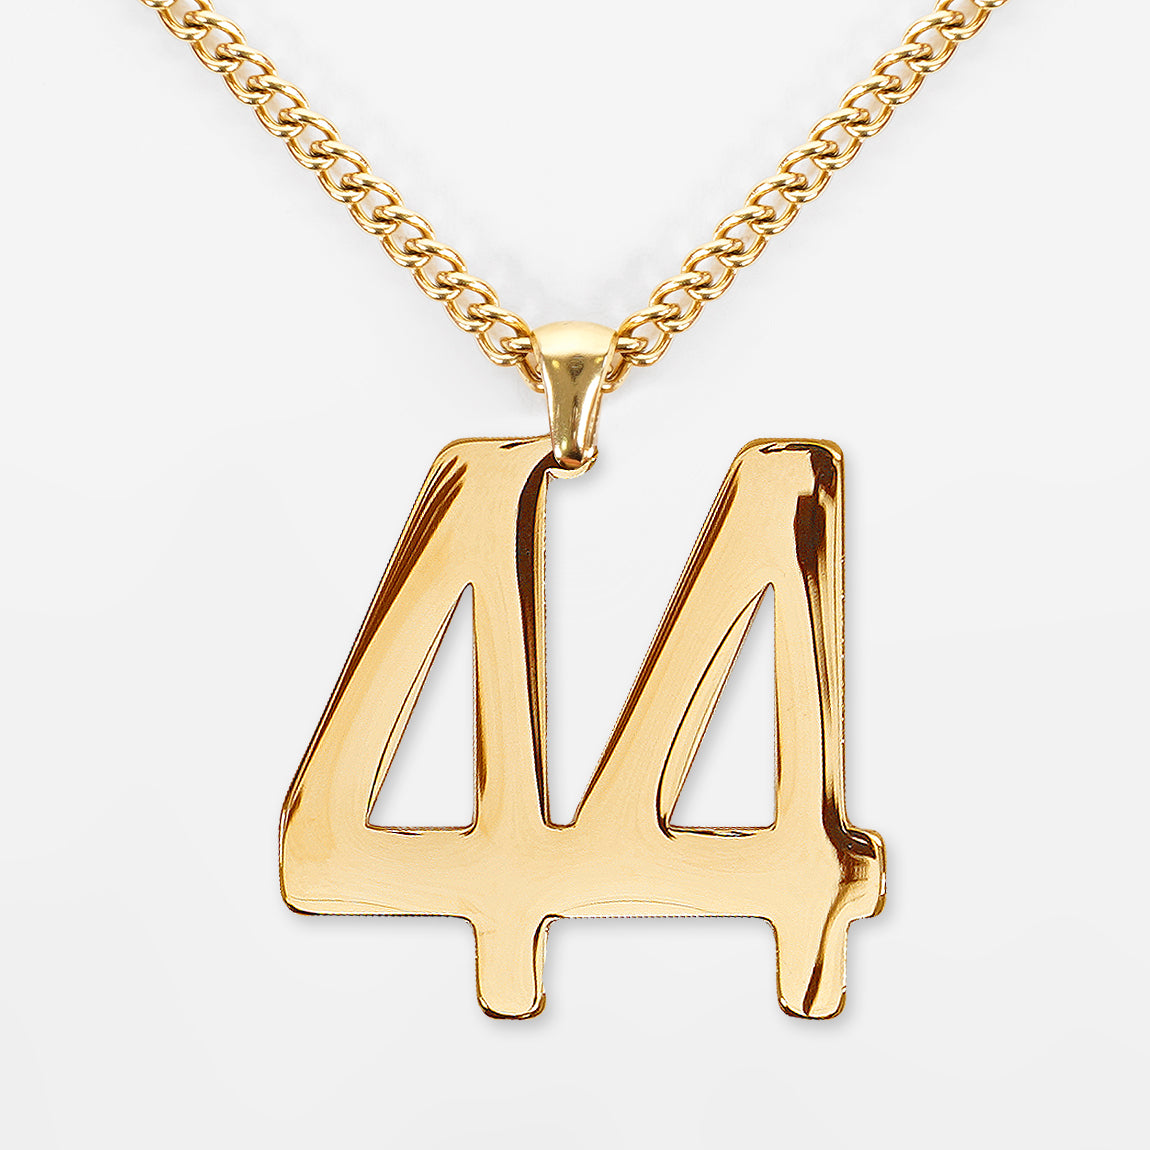 44 Number Pendant with Chain Necklace - Gold Plated Stainless Steel